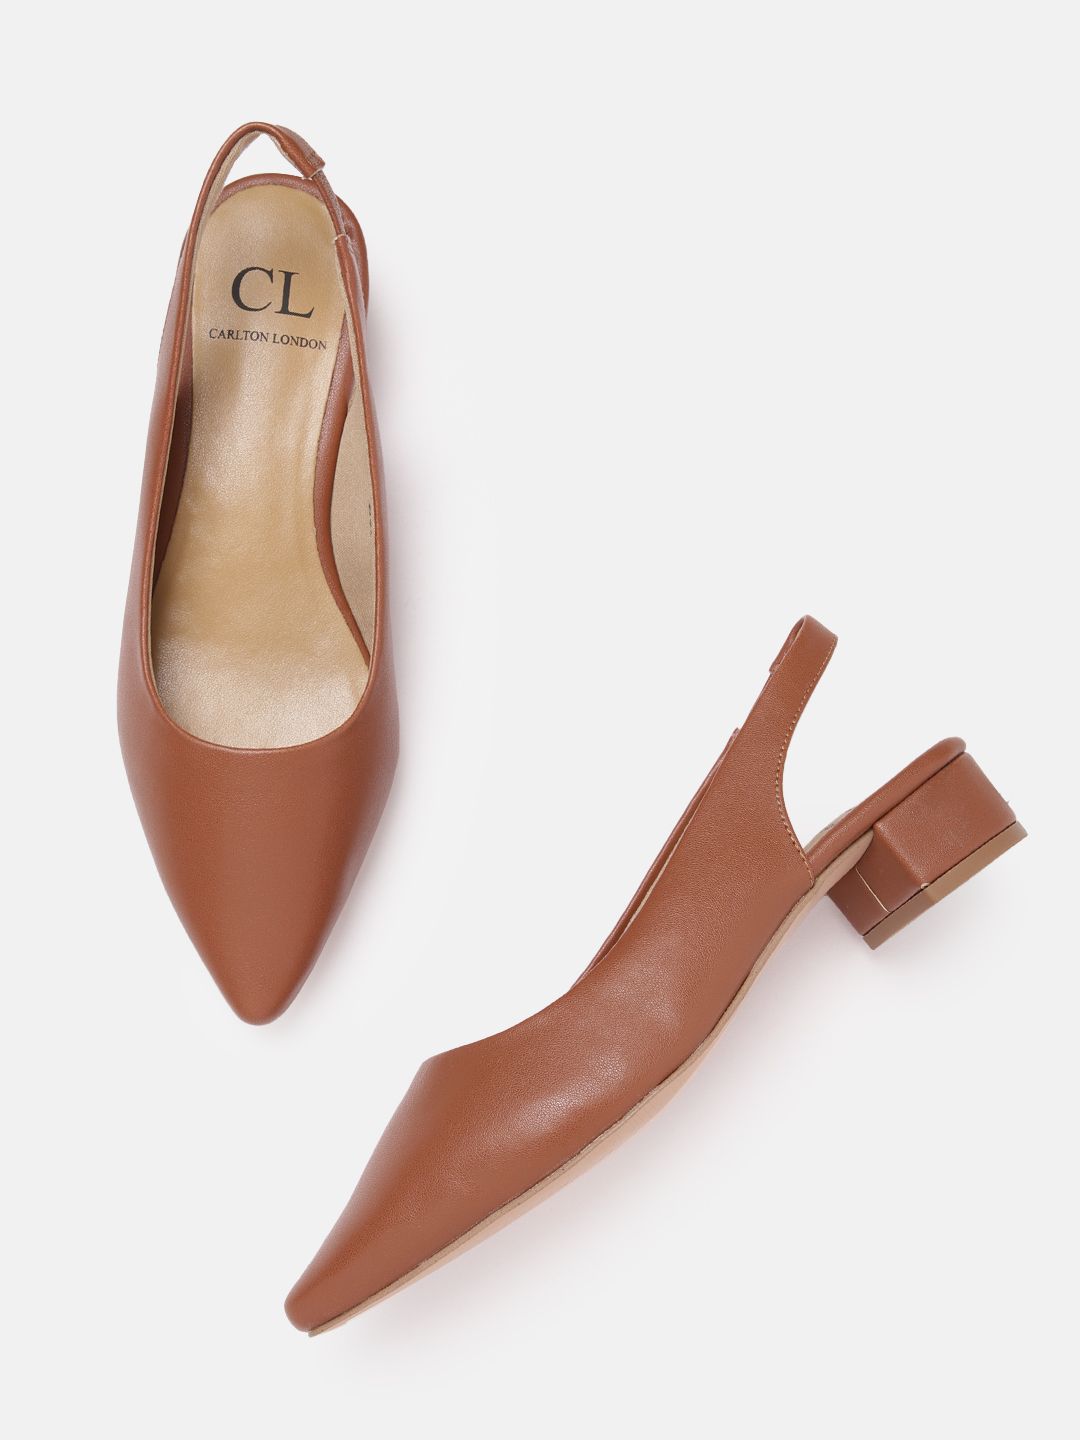 Carlton London Women Pointed Toe Mules Price in India